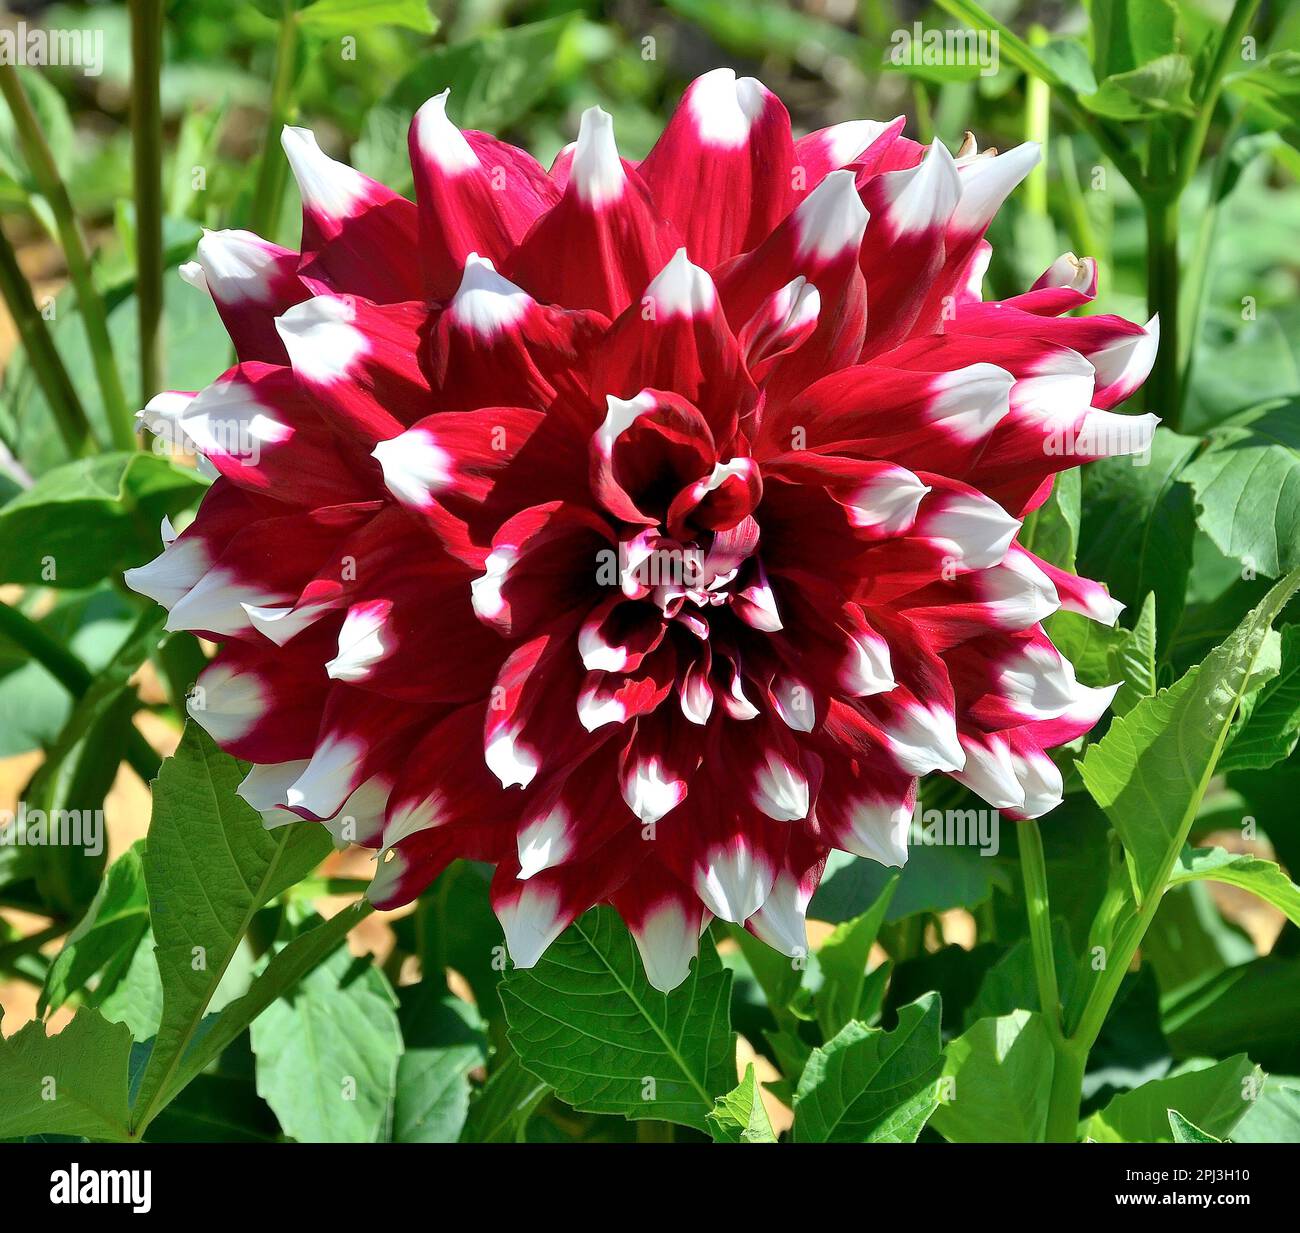 Big head of decorative bicolor dahlia flower variety Davos. Single red dahlia flower with white edges of petals close up. Floral greeting card or gard Stock Photo